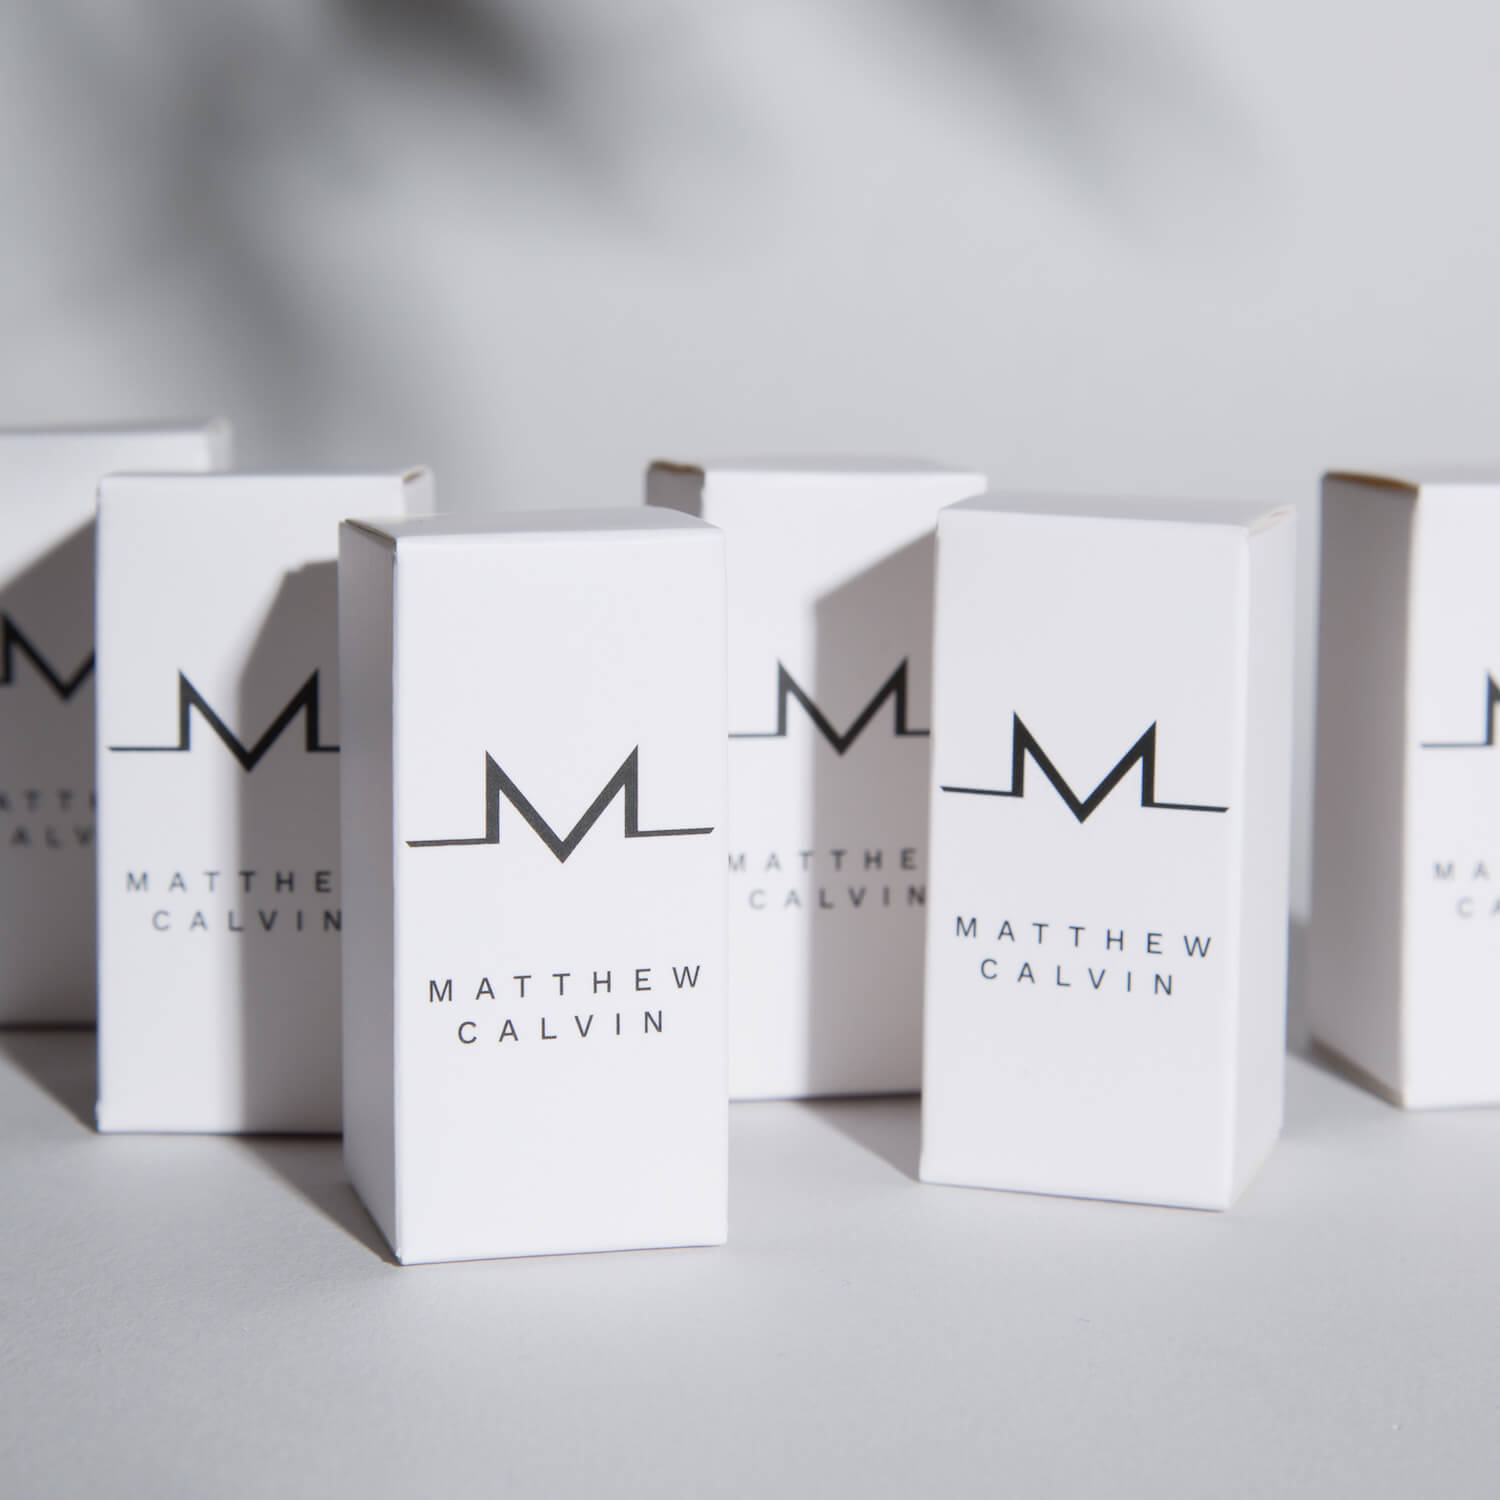 White boxes for earrings with Matthew Calvin written on them